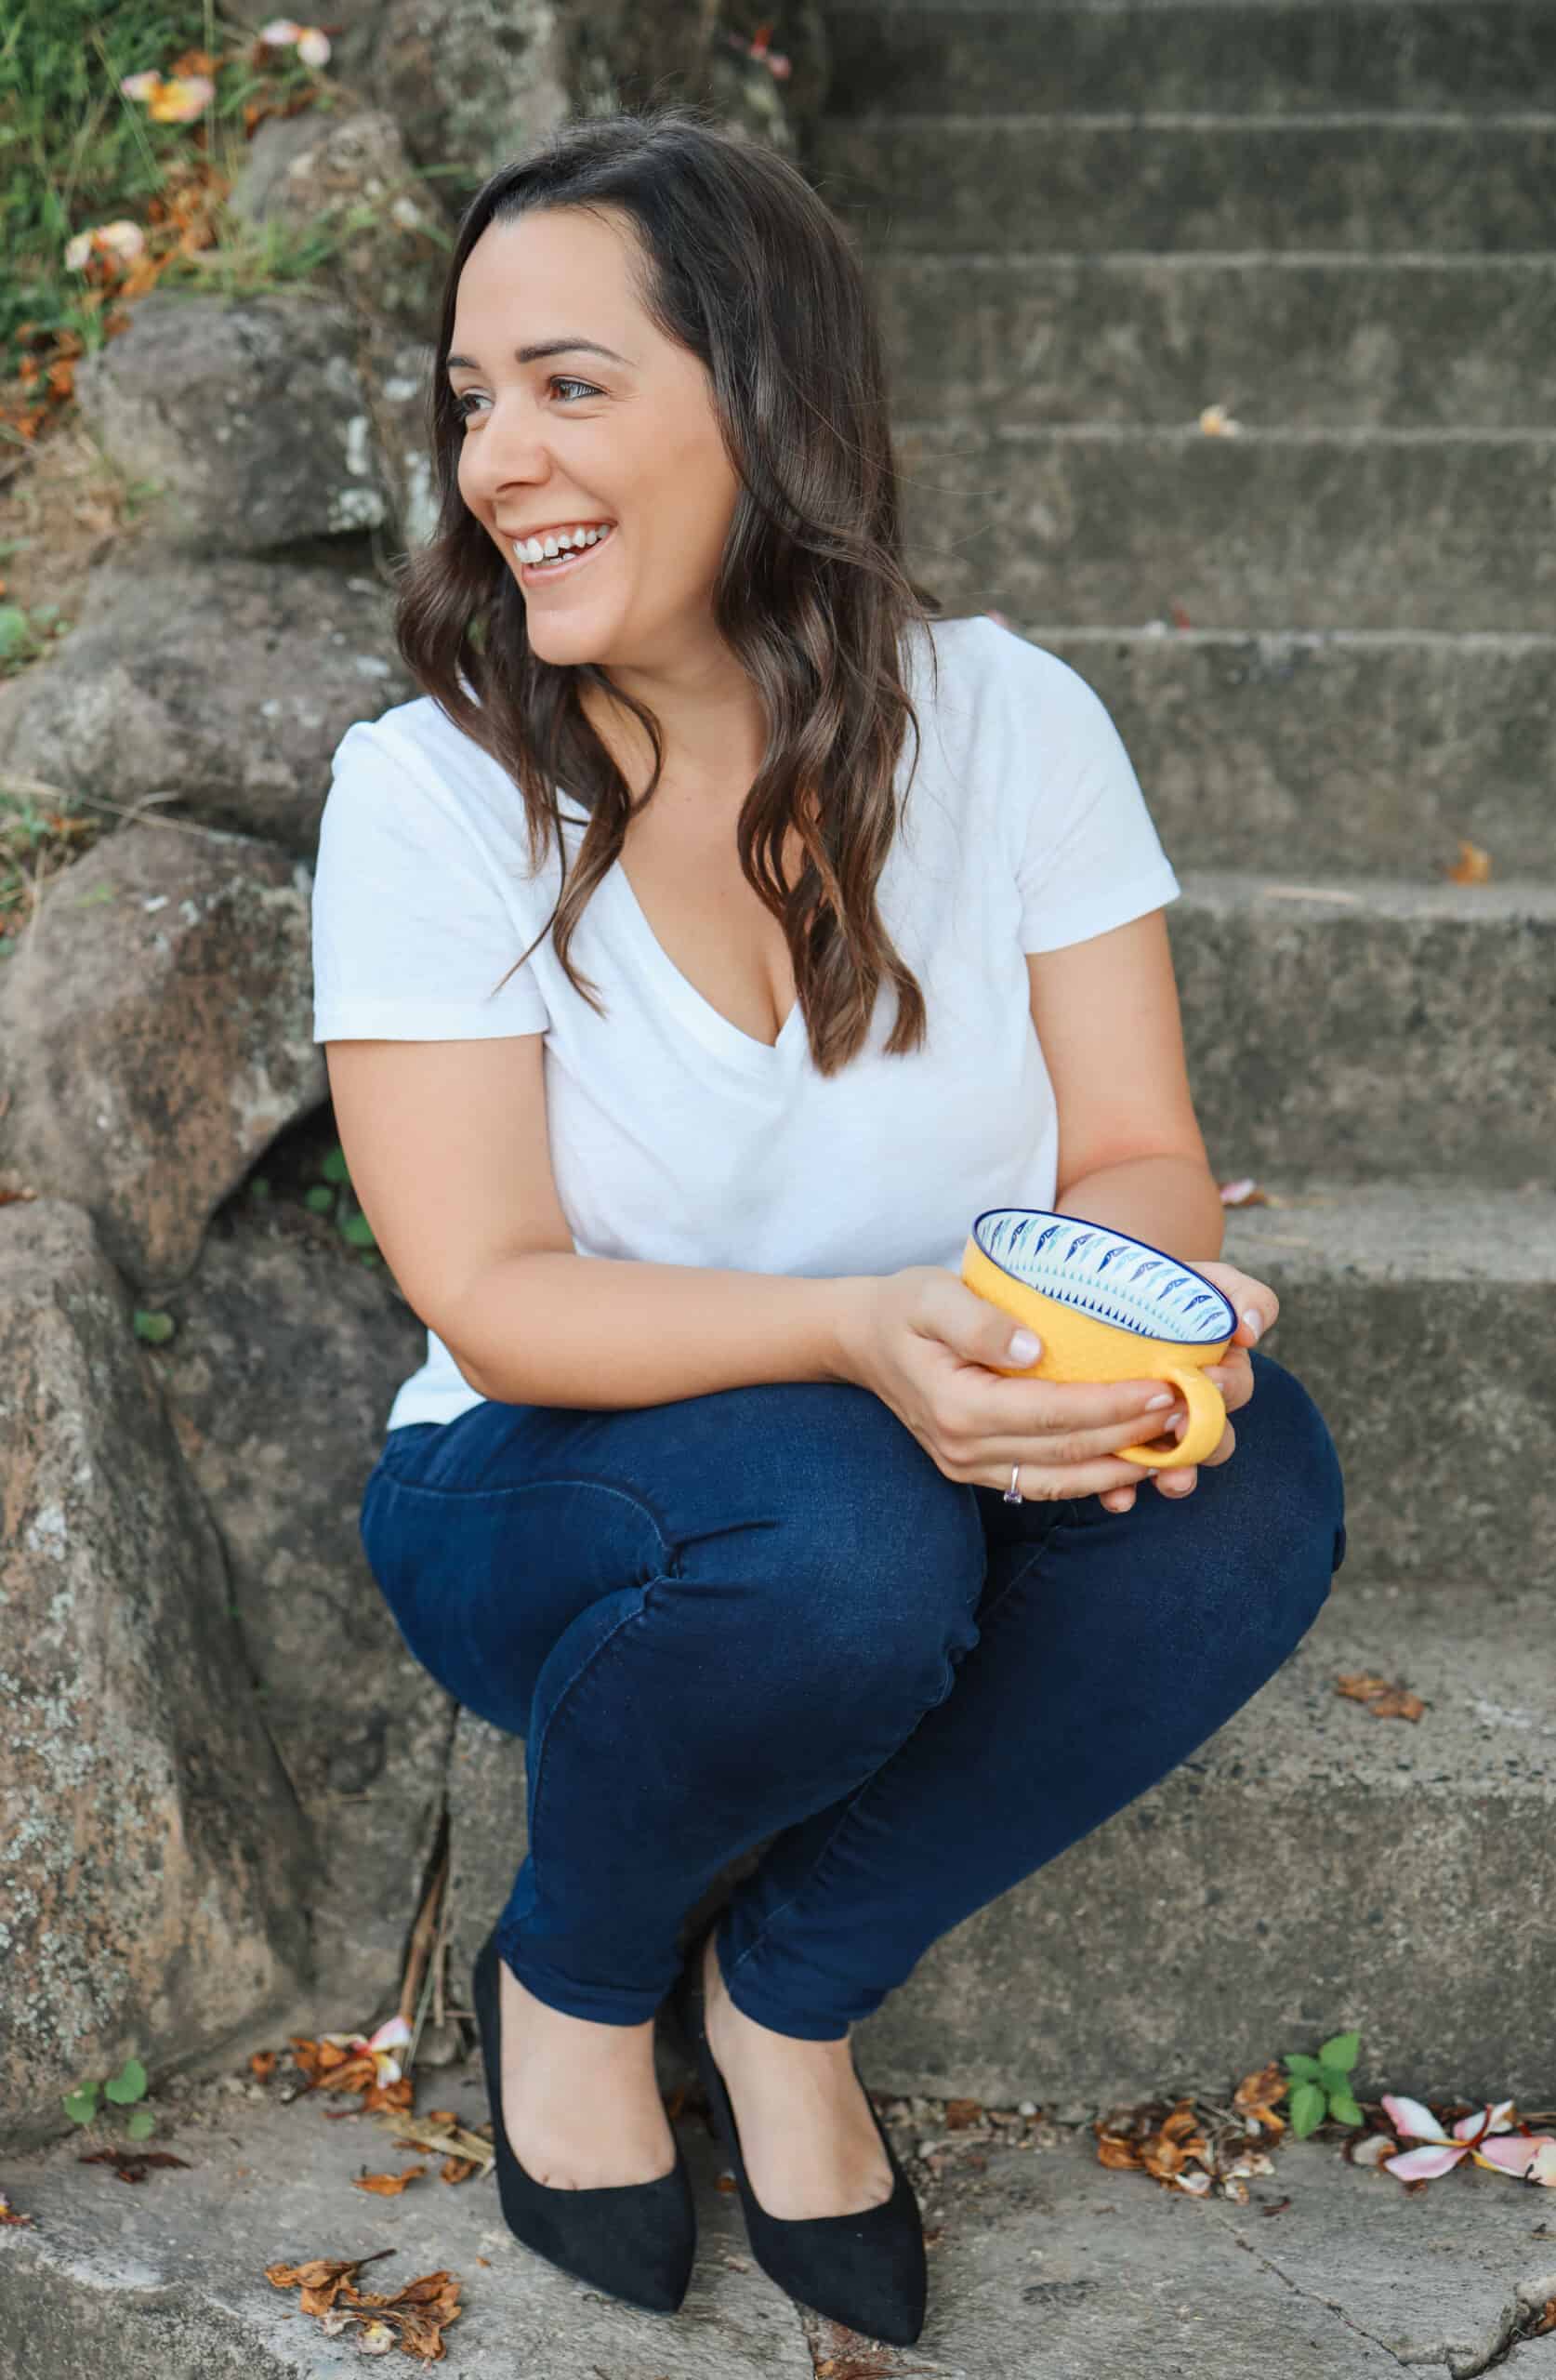 A woman sitting on steps, stylishly holding a yellow cup.